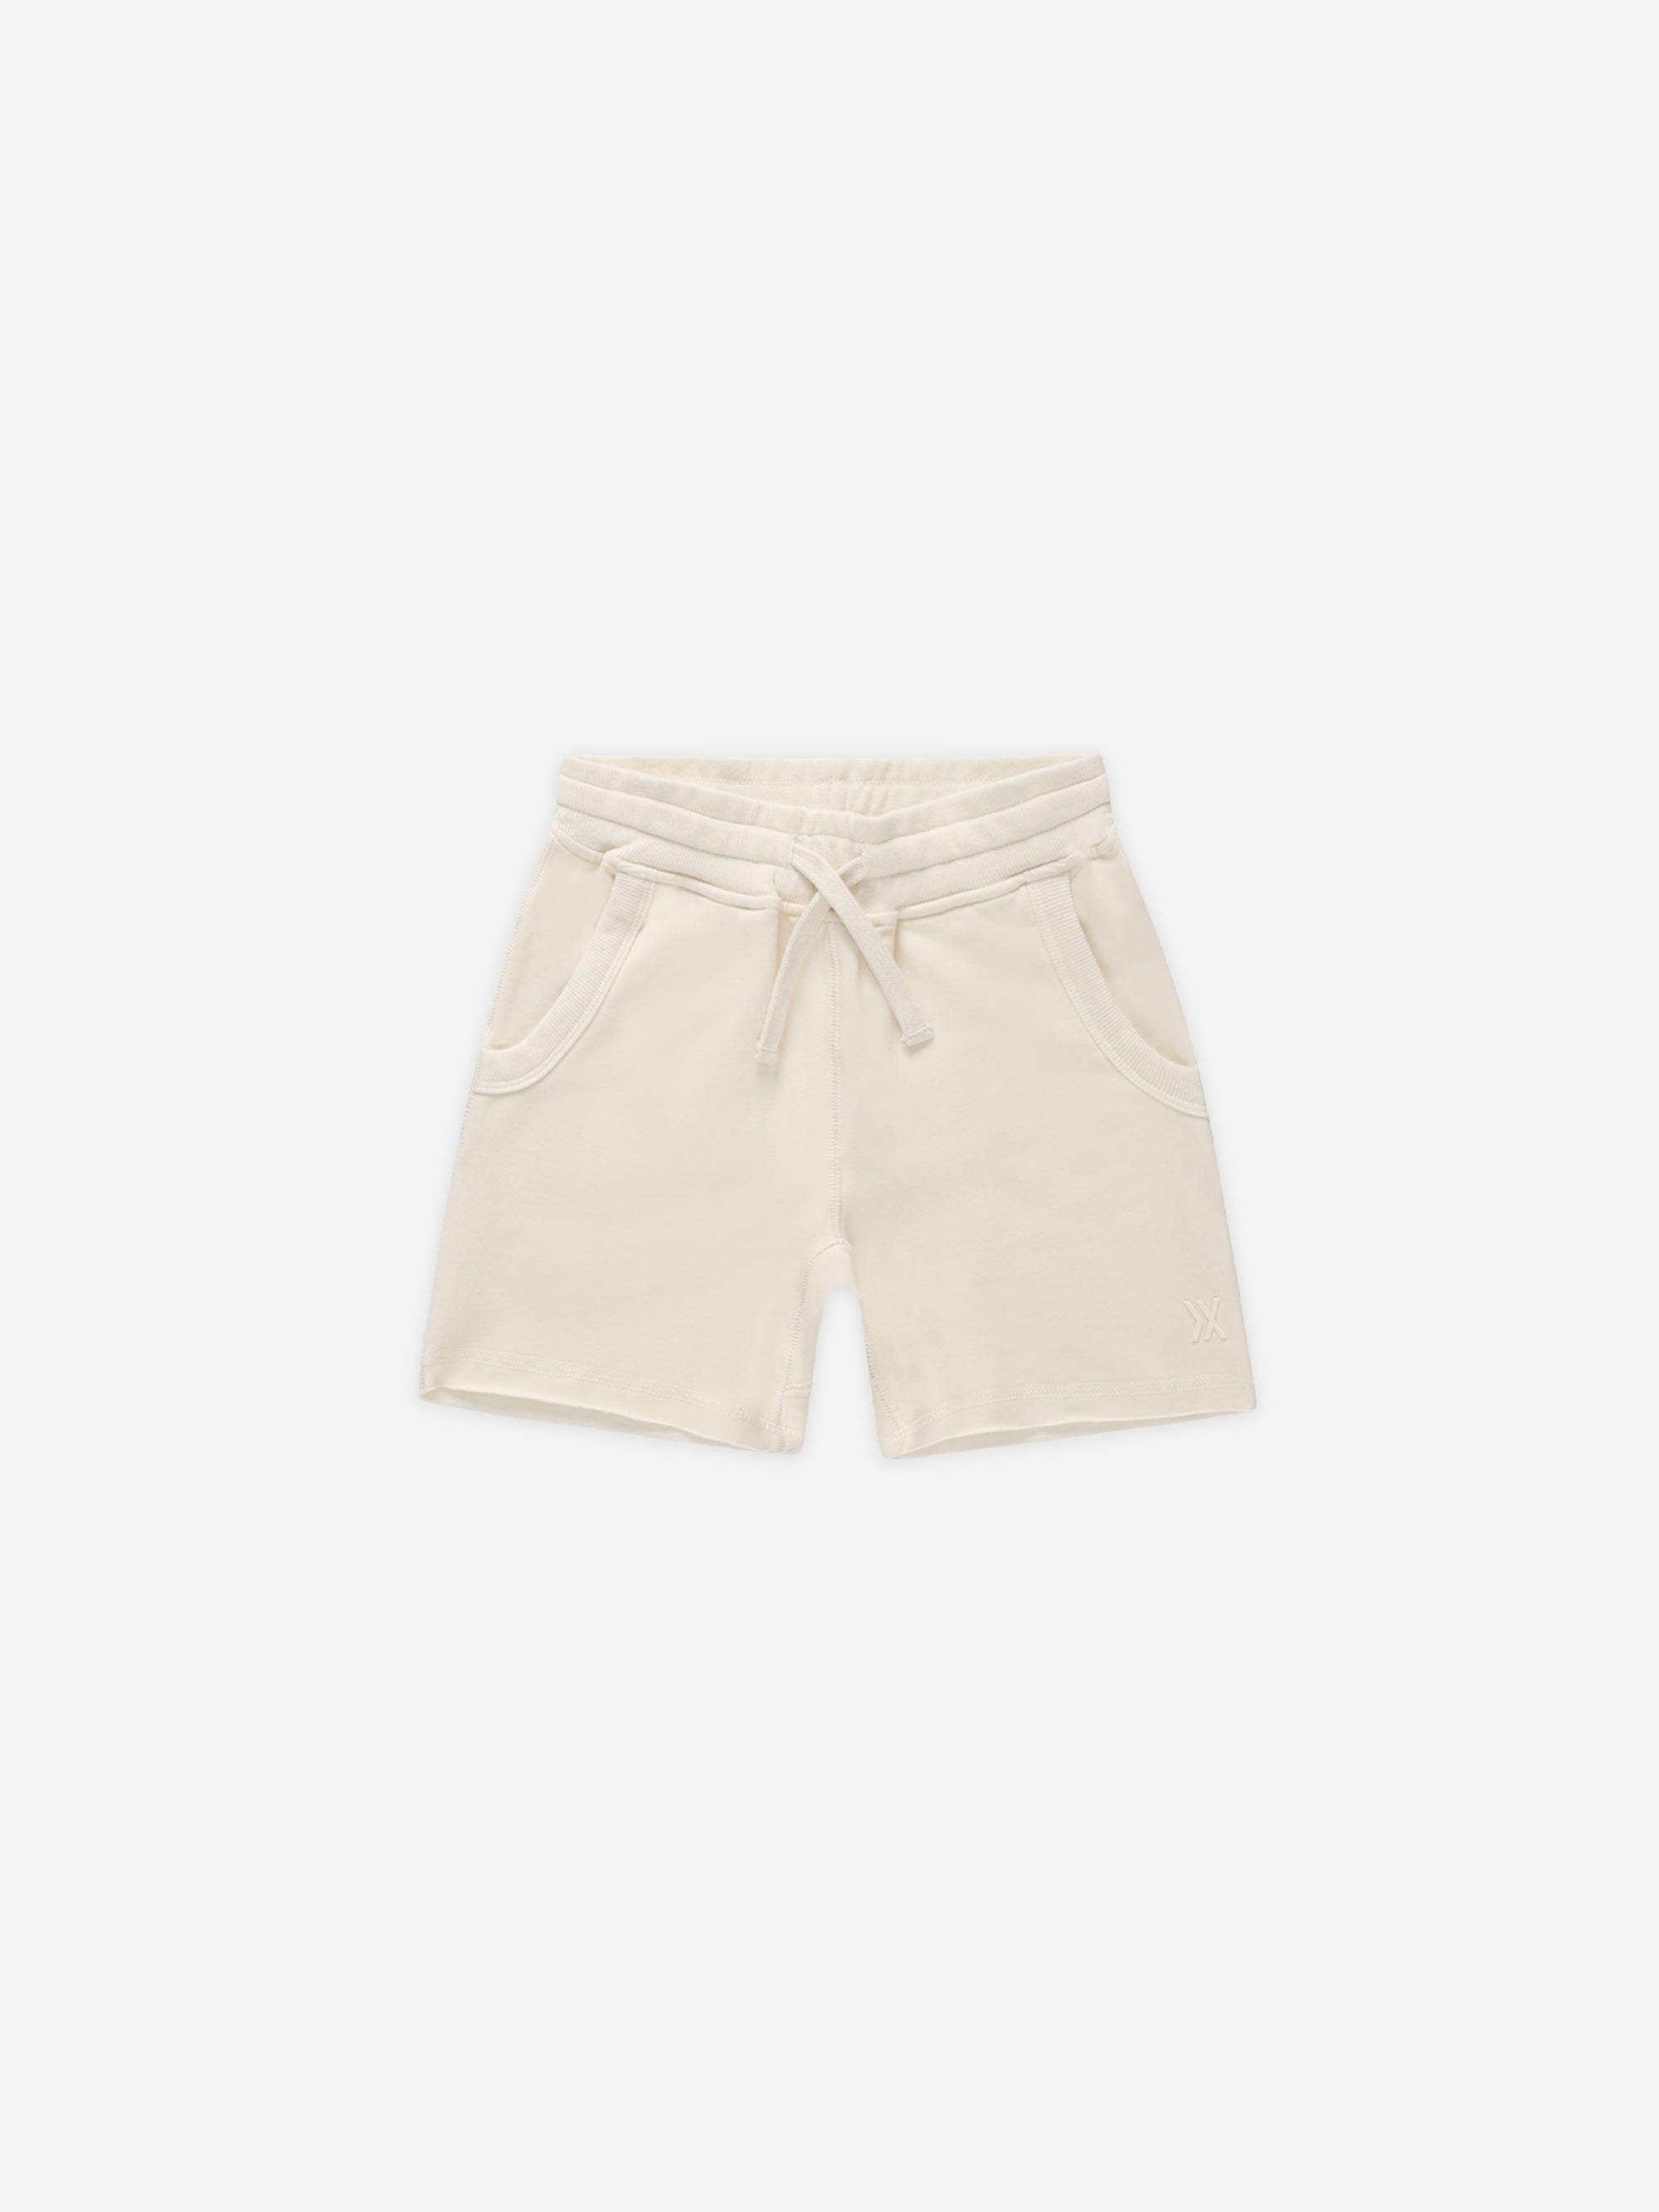 Ventura Short || Natural - Rylee + Cru | Kids Clothes | Trendy Baby Clothes | Modern Infant Outfits |